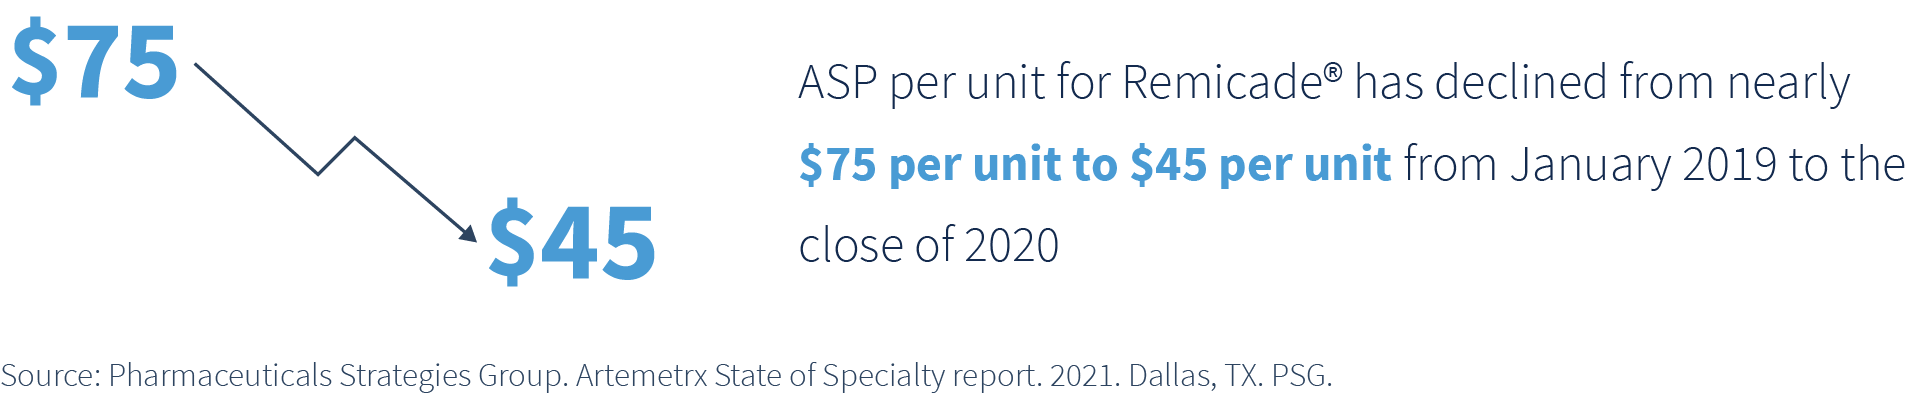 Remicade declined from nearly $75 per unit to $45 per unit graphic